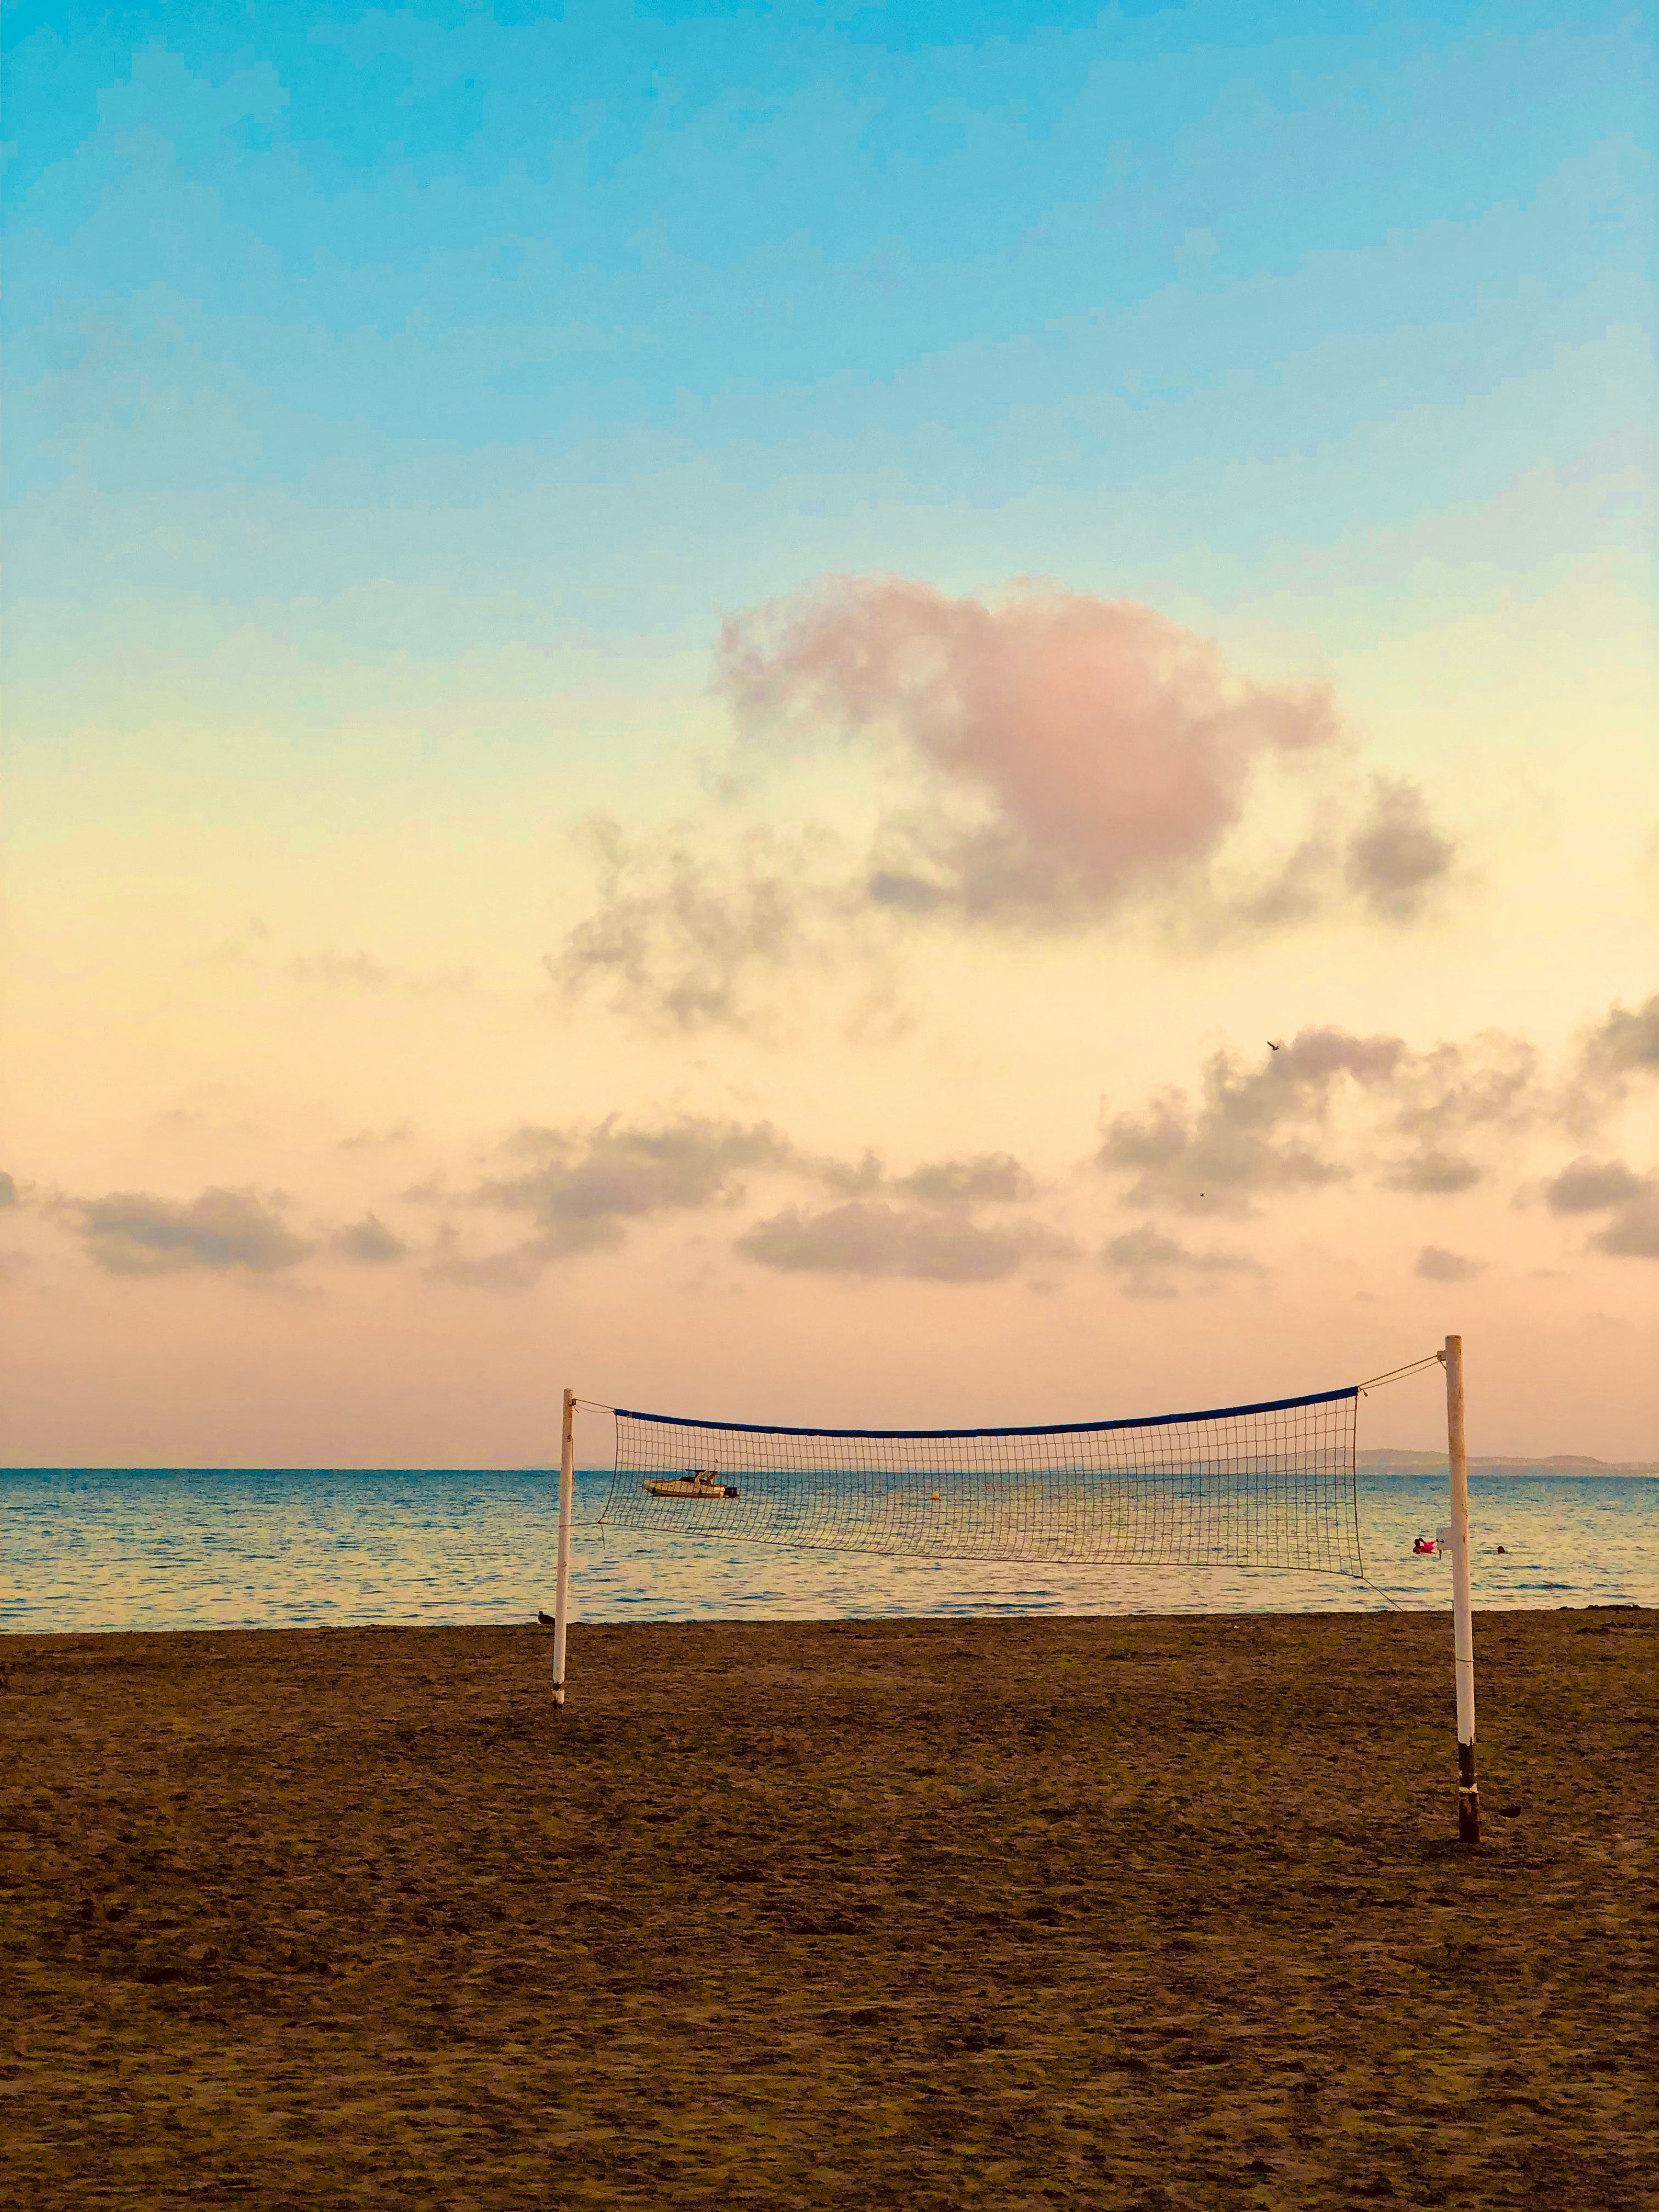 Volleyball net on the beach during sunset - Volleyball